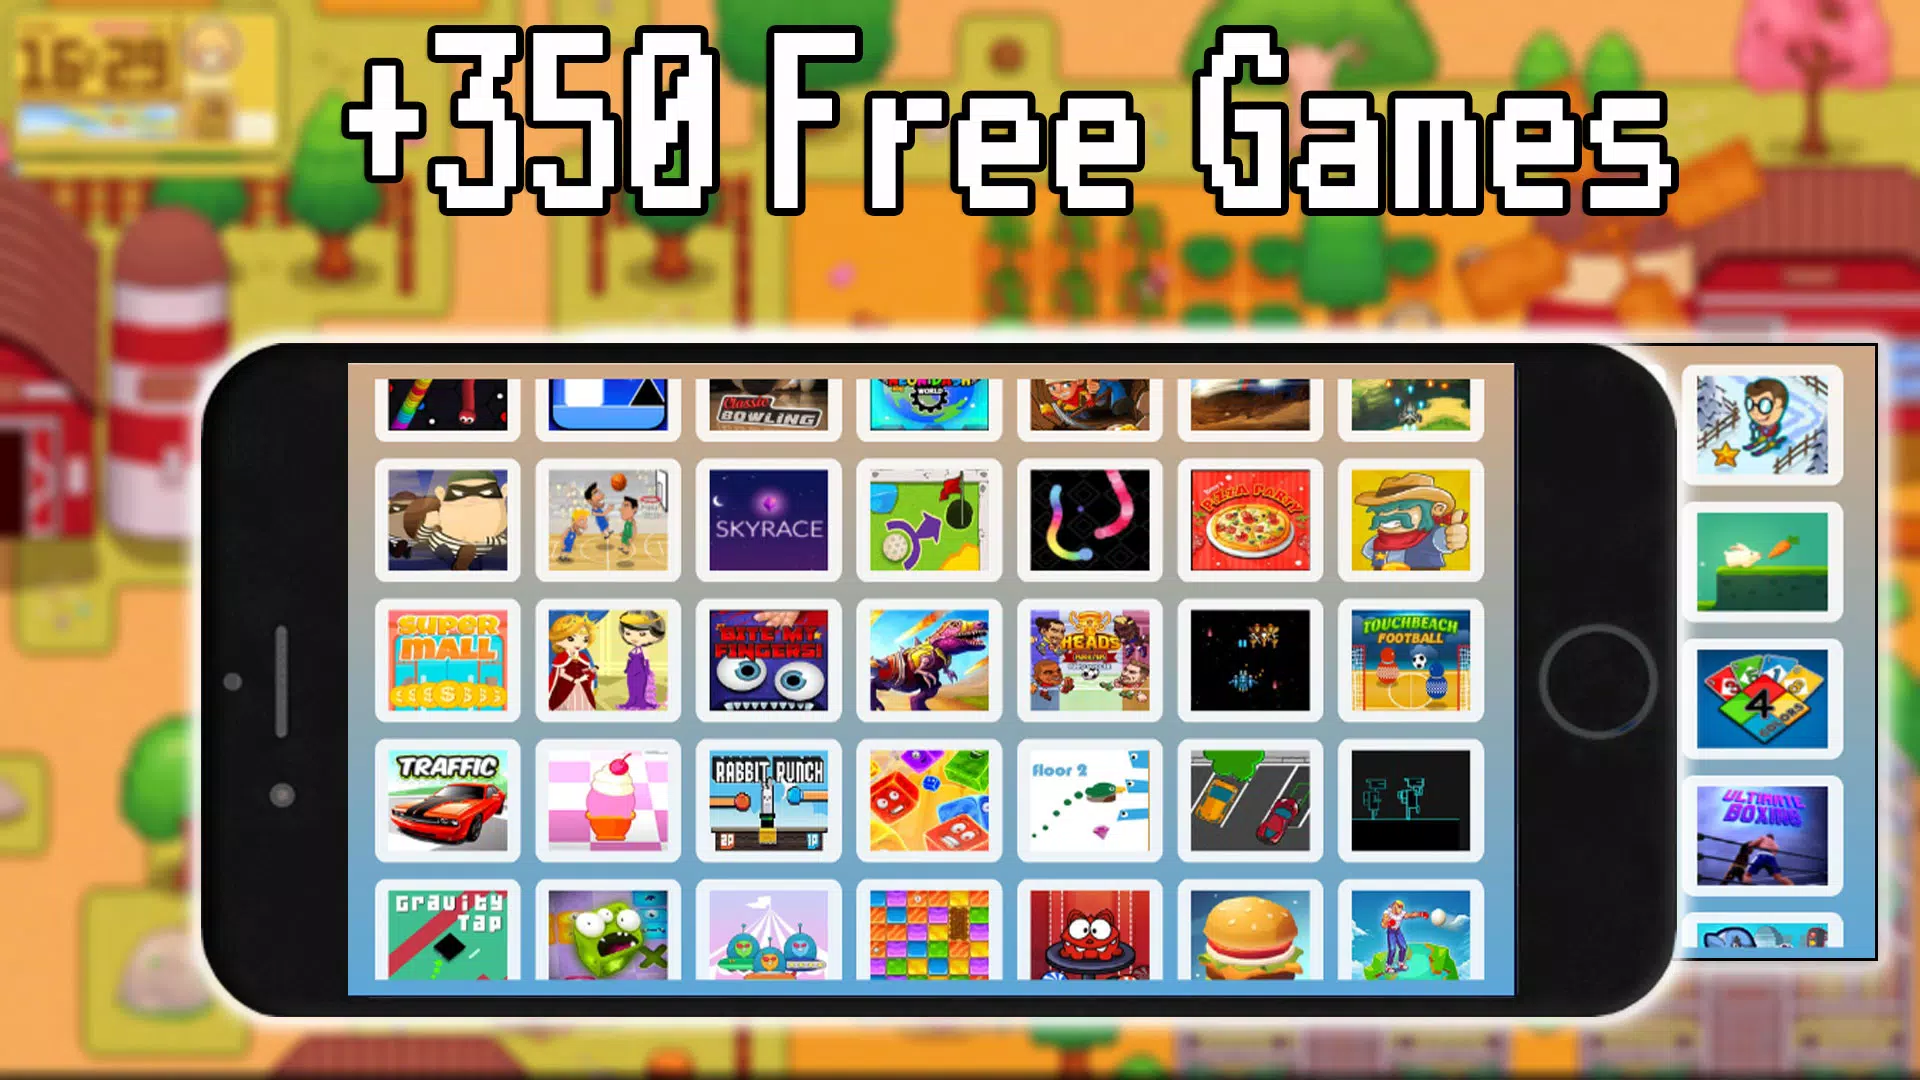 2 3 4 Player Mini Games - The One Stop App for the Best Multiplayer Gaming  Fun